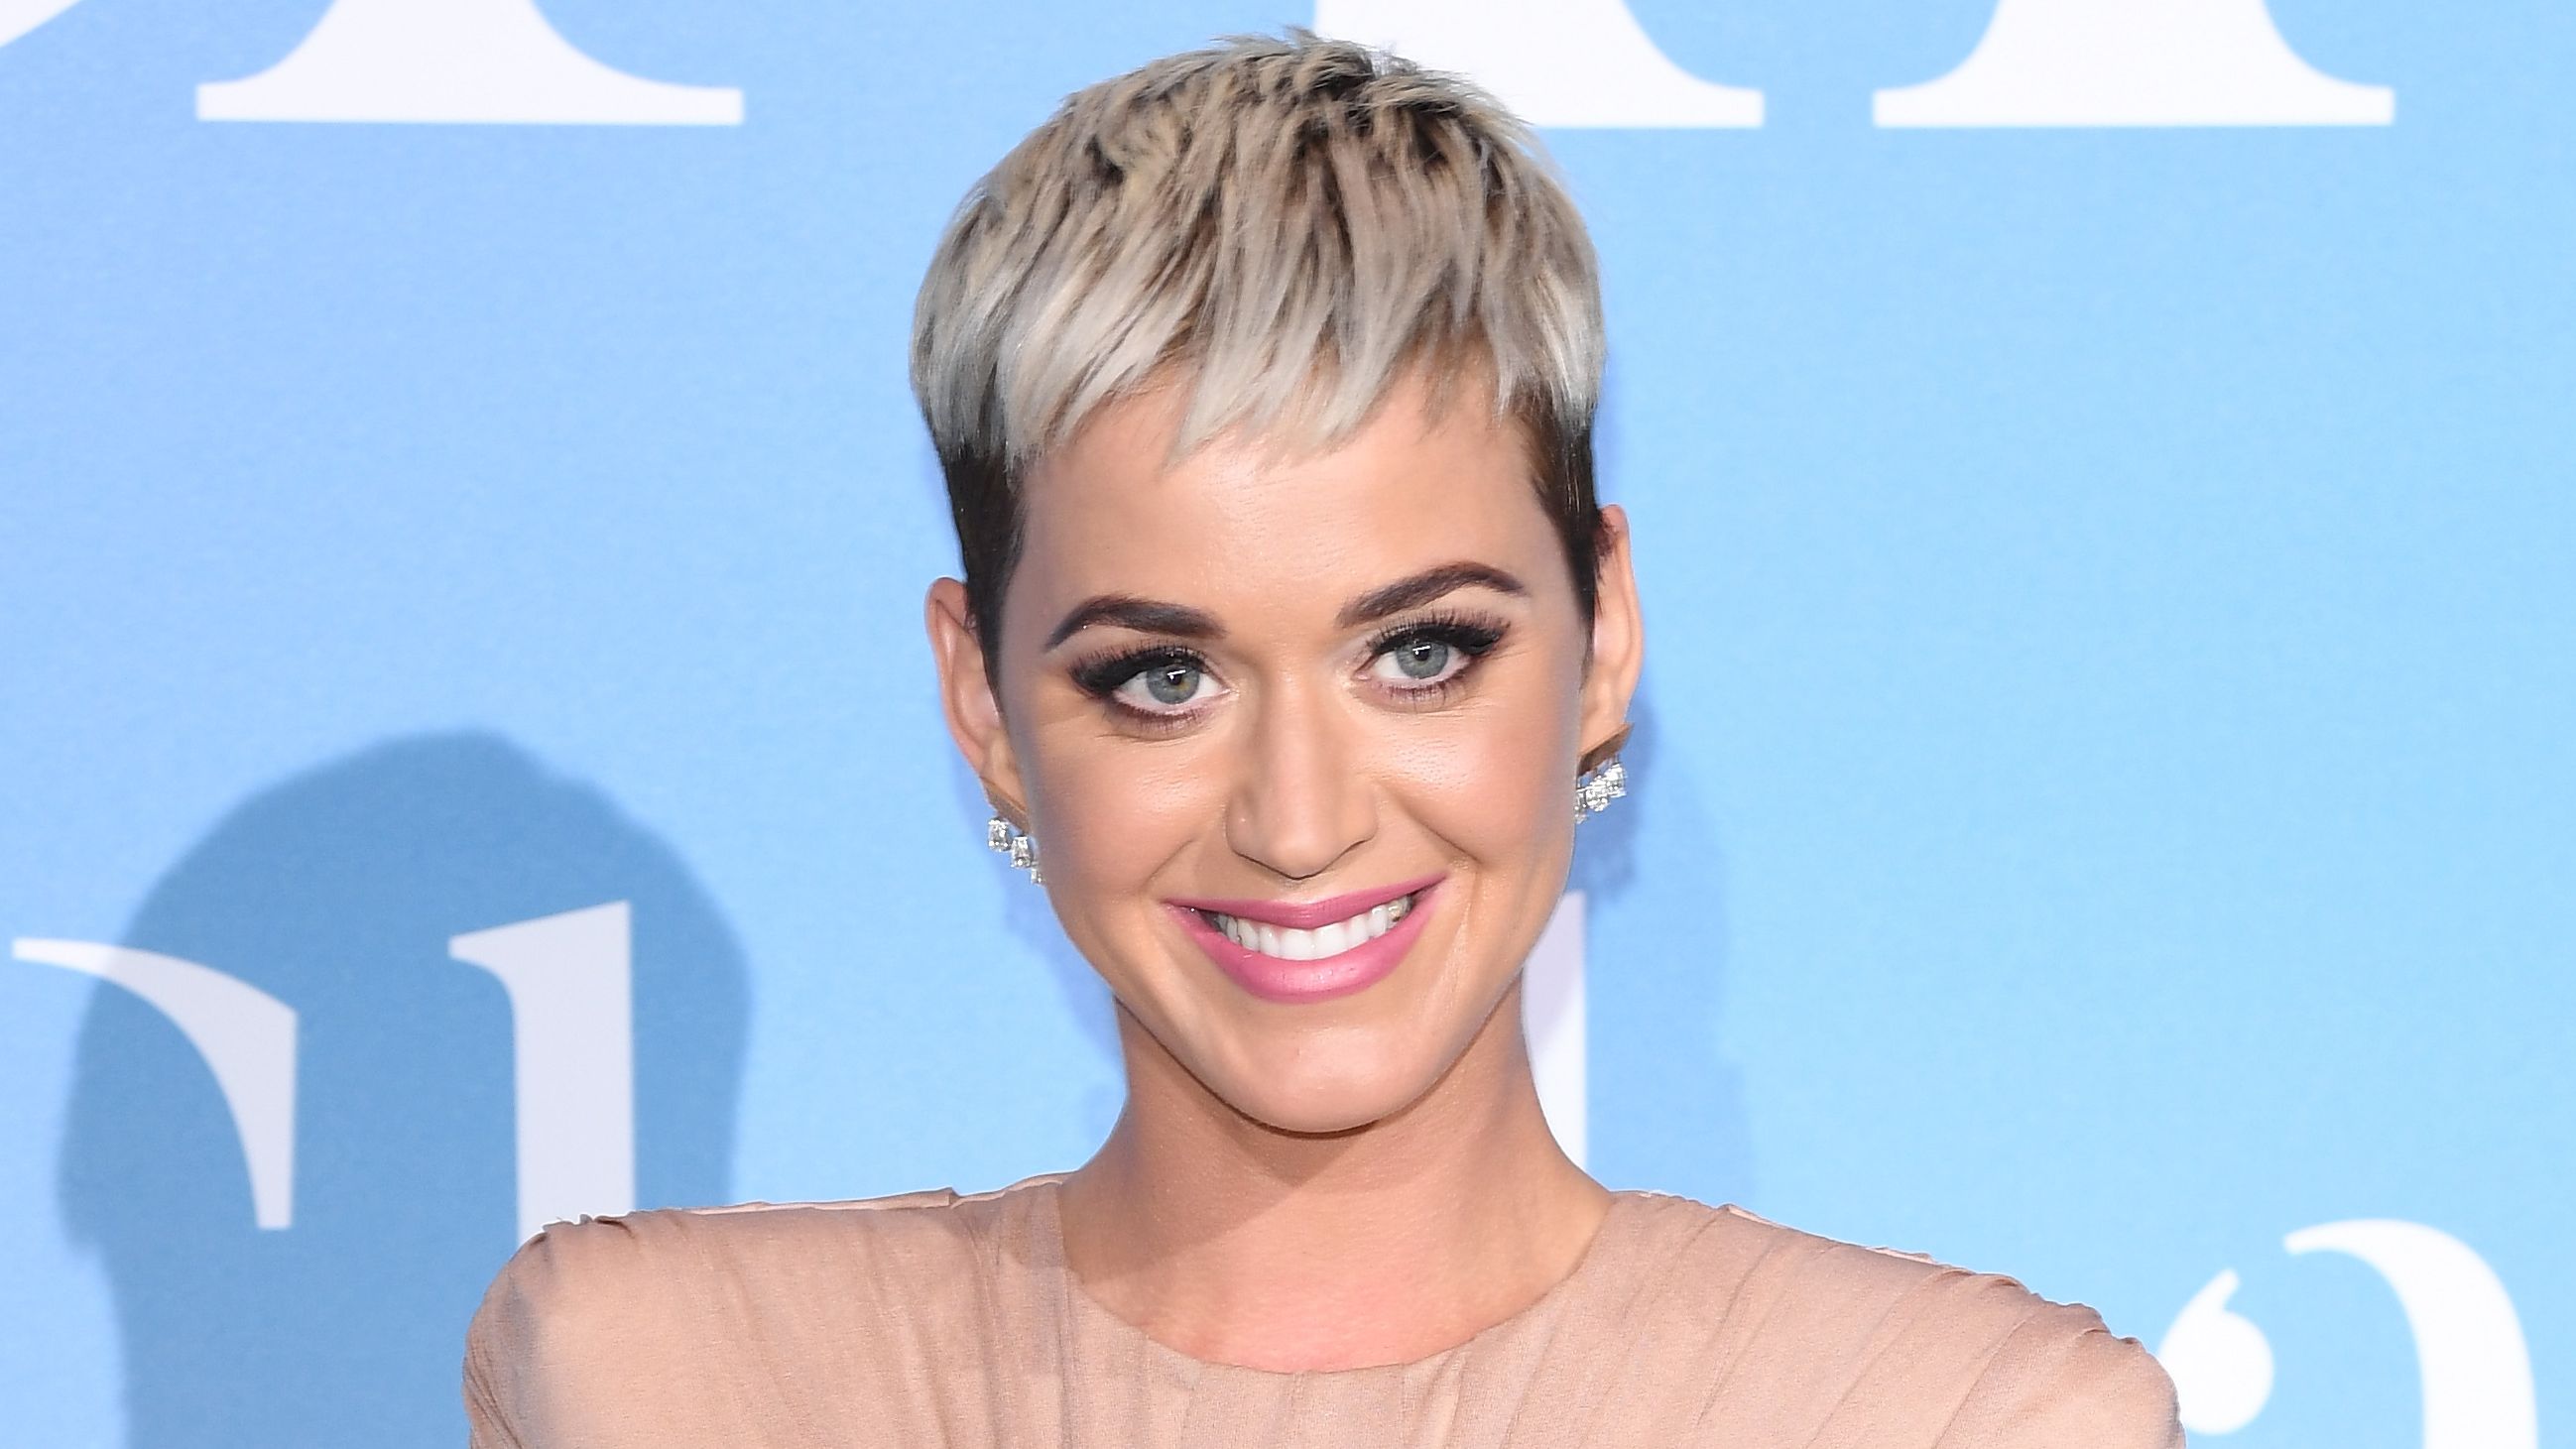 Katy Perry ditches pixie cut as she shows off stunning long hair